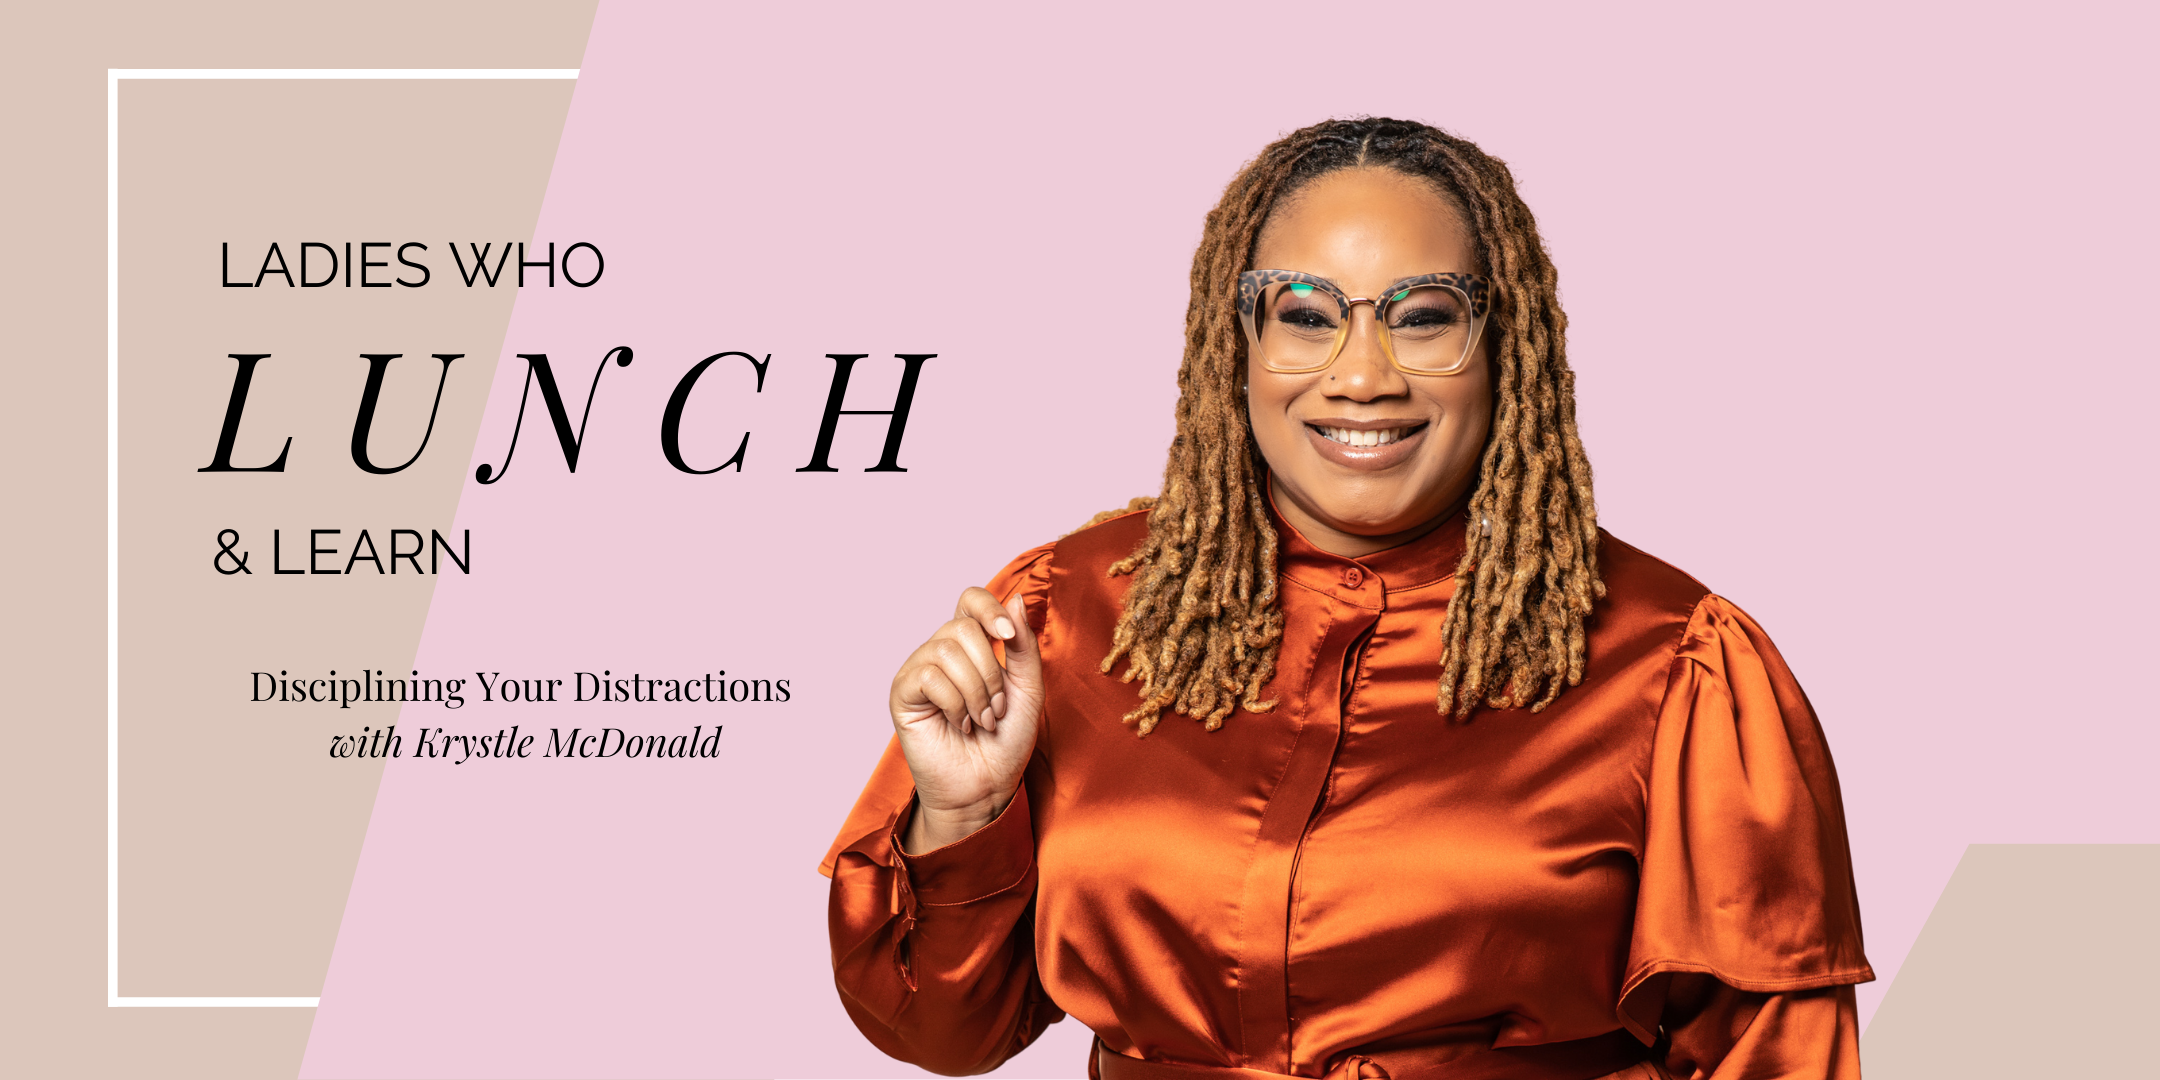 Ladies Who Lunch and Learn: Disciplining Your Distractions - The